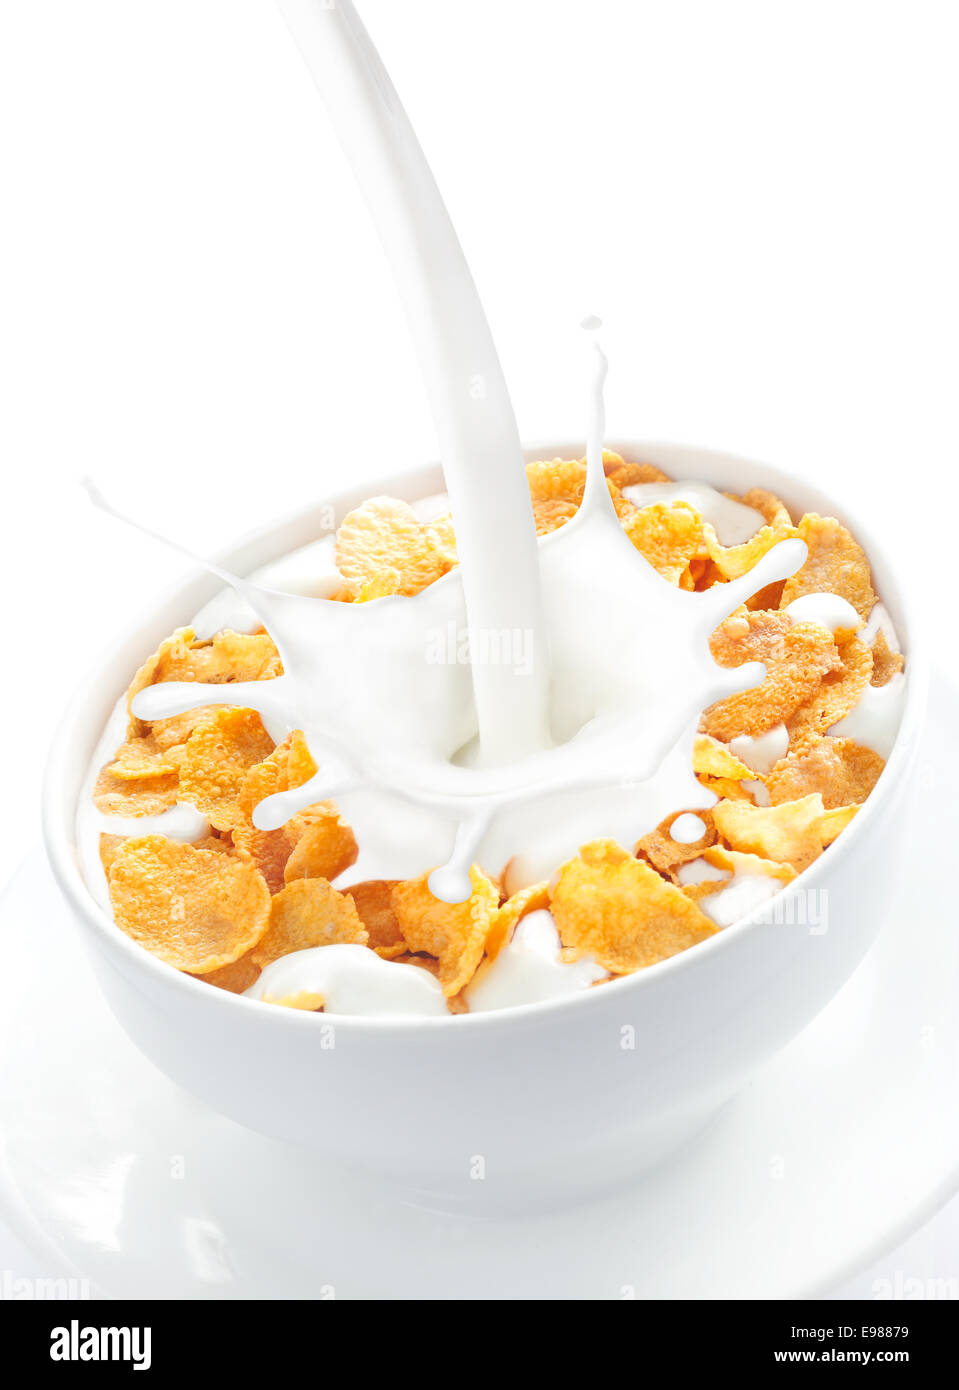 Appetizing view of milk pouring into a bowl of nutritious and delicious corn flake cereal Stock Photo